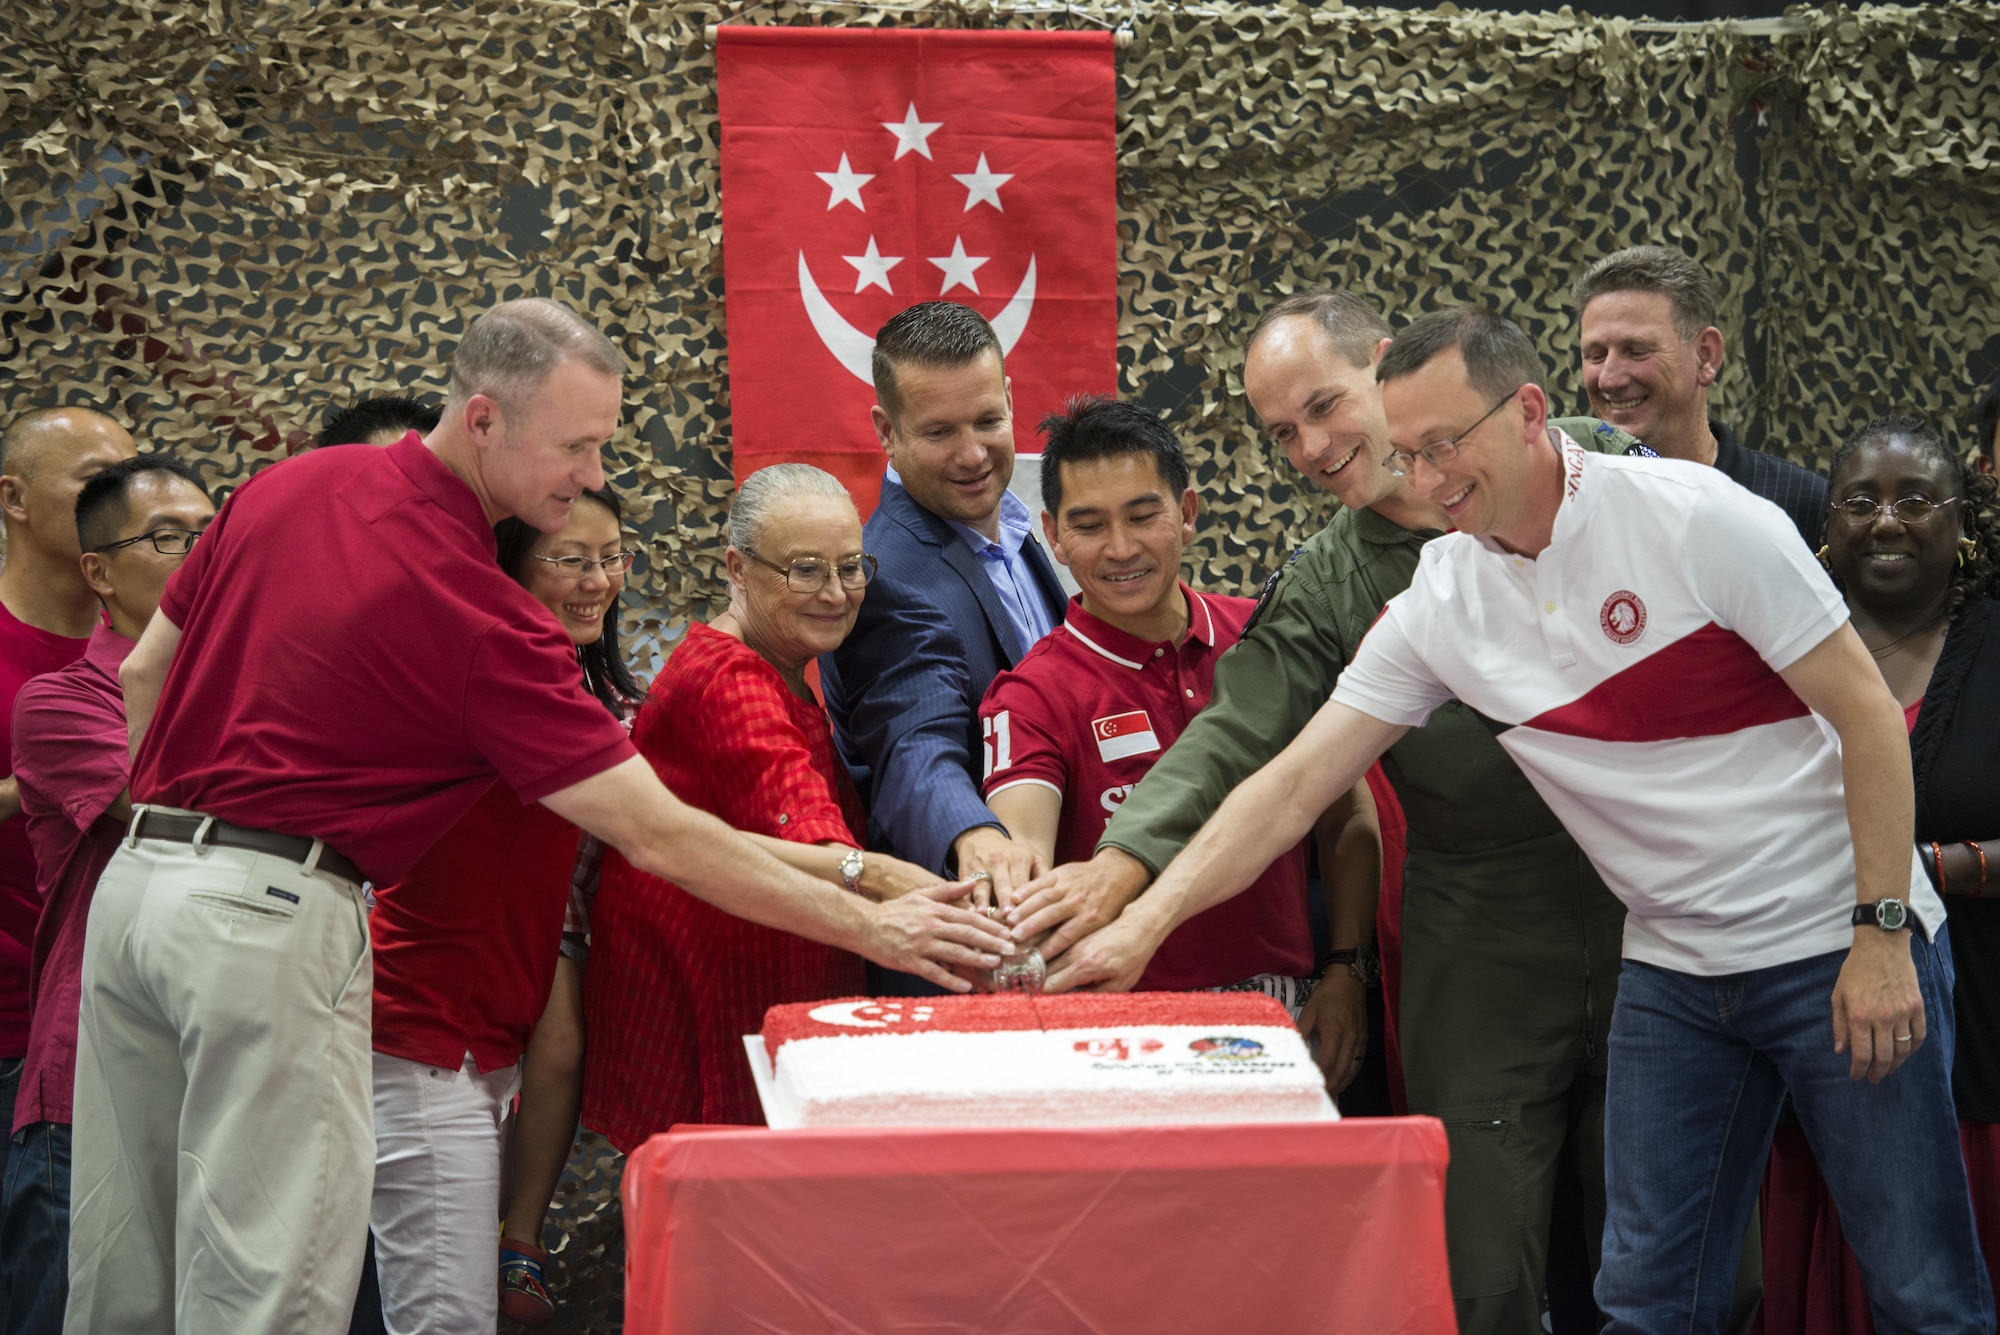 Mountain Home military and civic leaders assist in the cutting of the birthday cake in celebration of Singapore’s 51st birthday August 5, 2016, at Mountain Home AFB, Idaho. Singapore celebrated 51 years of independence August 9, 2016. (U.S. Air Force photo by 2nd Lt. Kippun Sumner/Released)